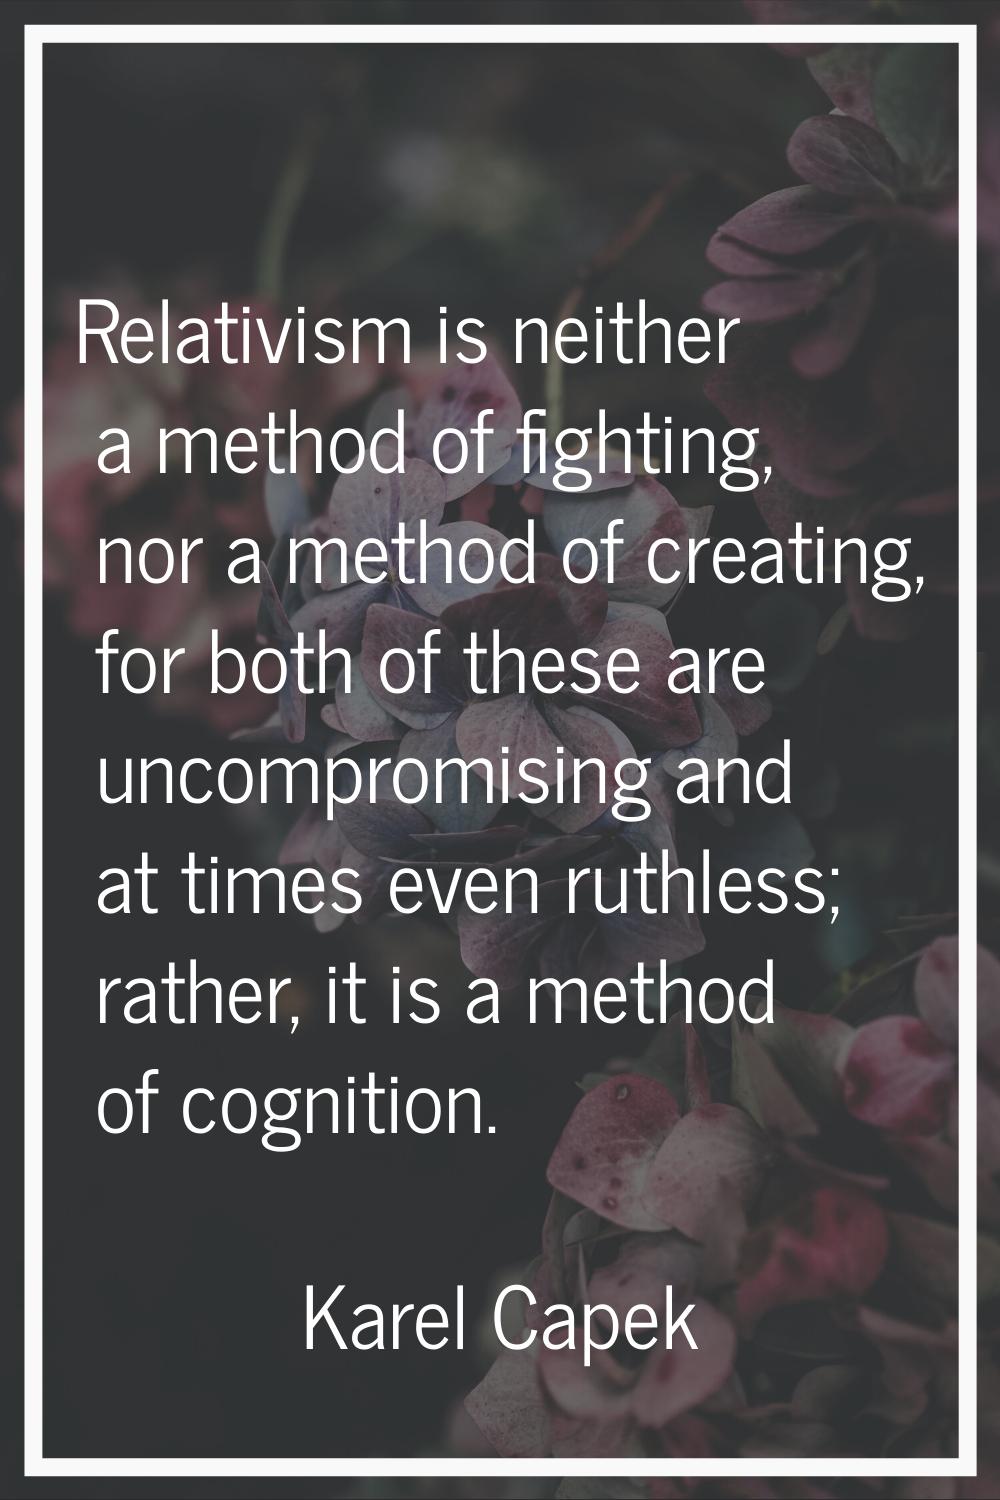 Relativism is neither a method of fighting, nor a method of creating, for both of these are uncompr